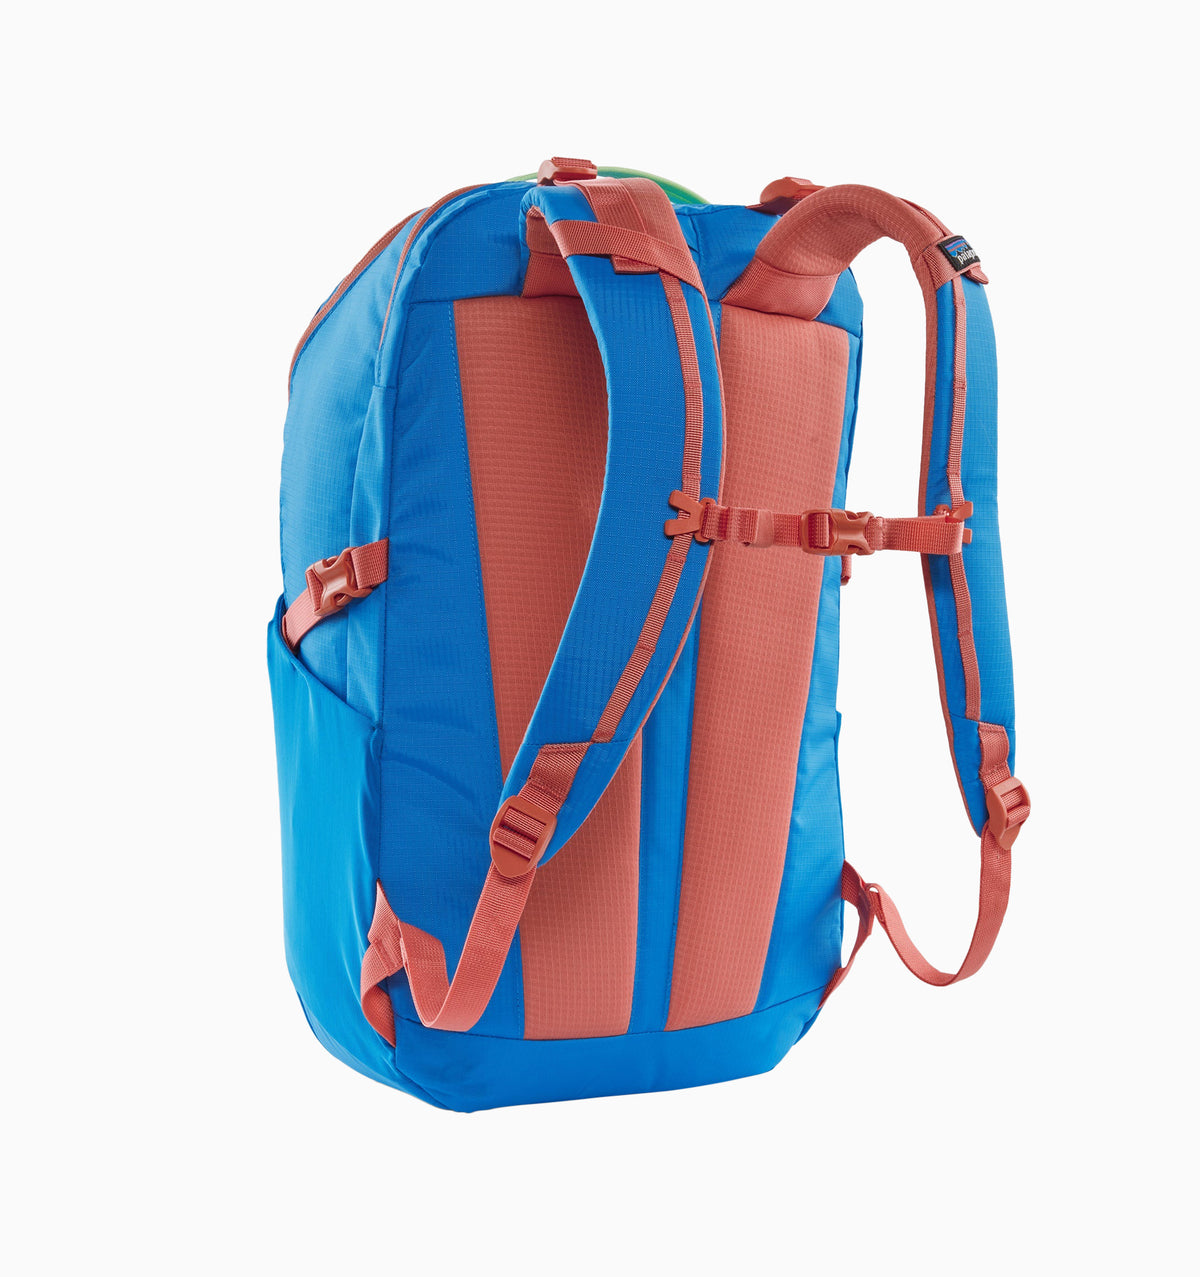 Patagonia 15 Refugio Day Pack 30L - Vessel Blue